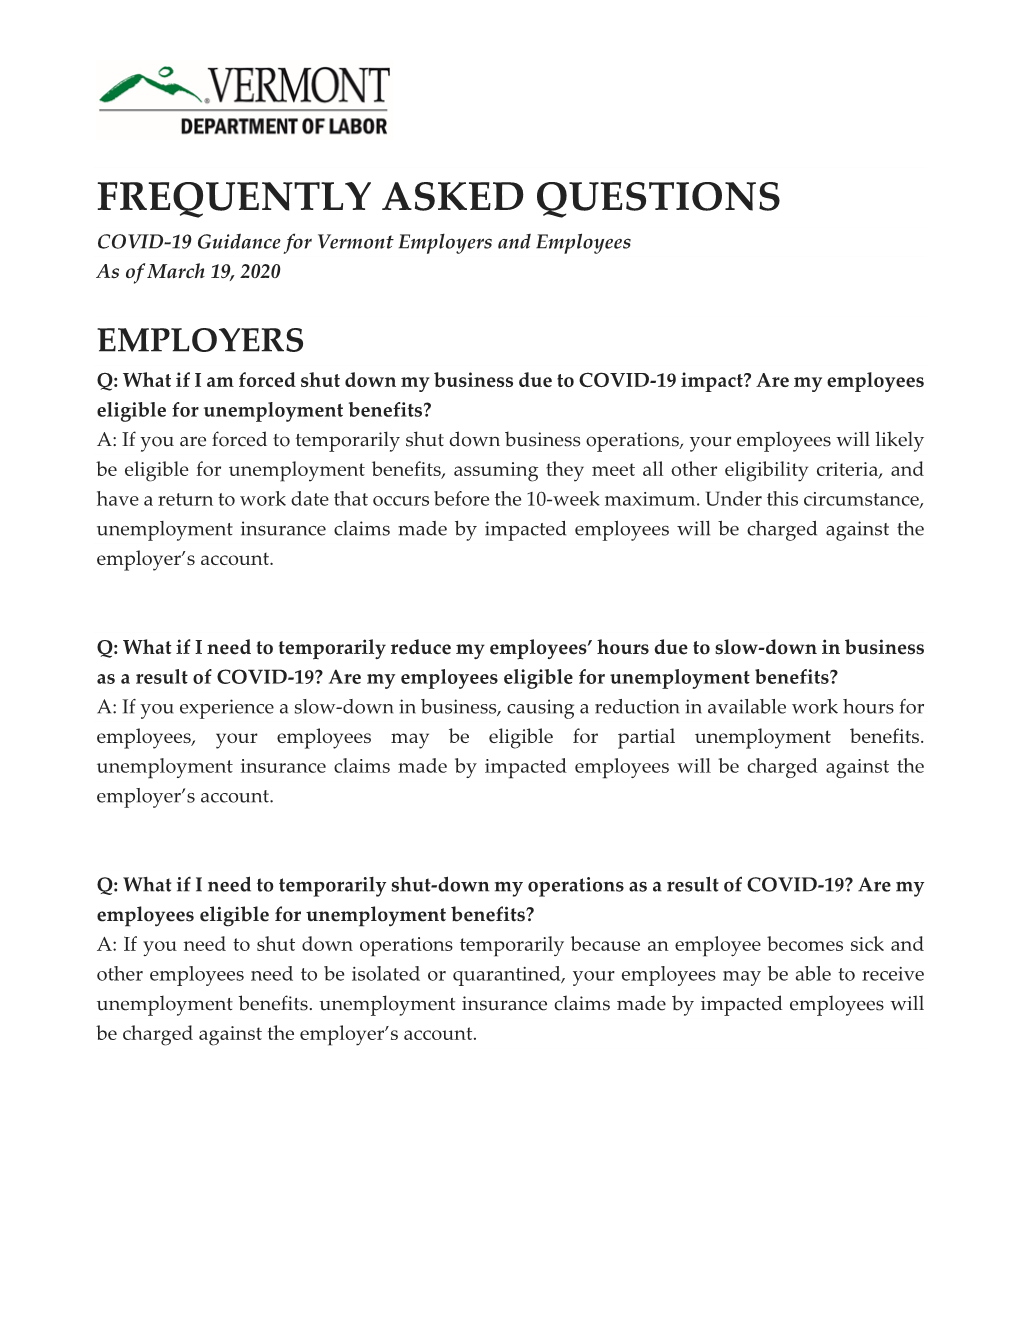 FREQUENTLY ASKED QUESTIONS COVID-19 Guidance for Vermont Employers and Employees As of March 19, 2020